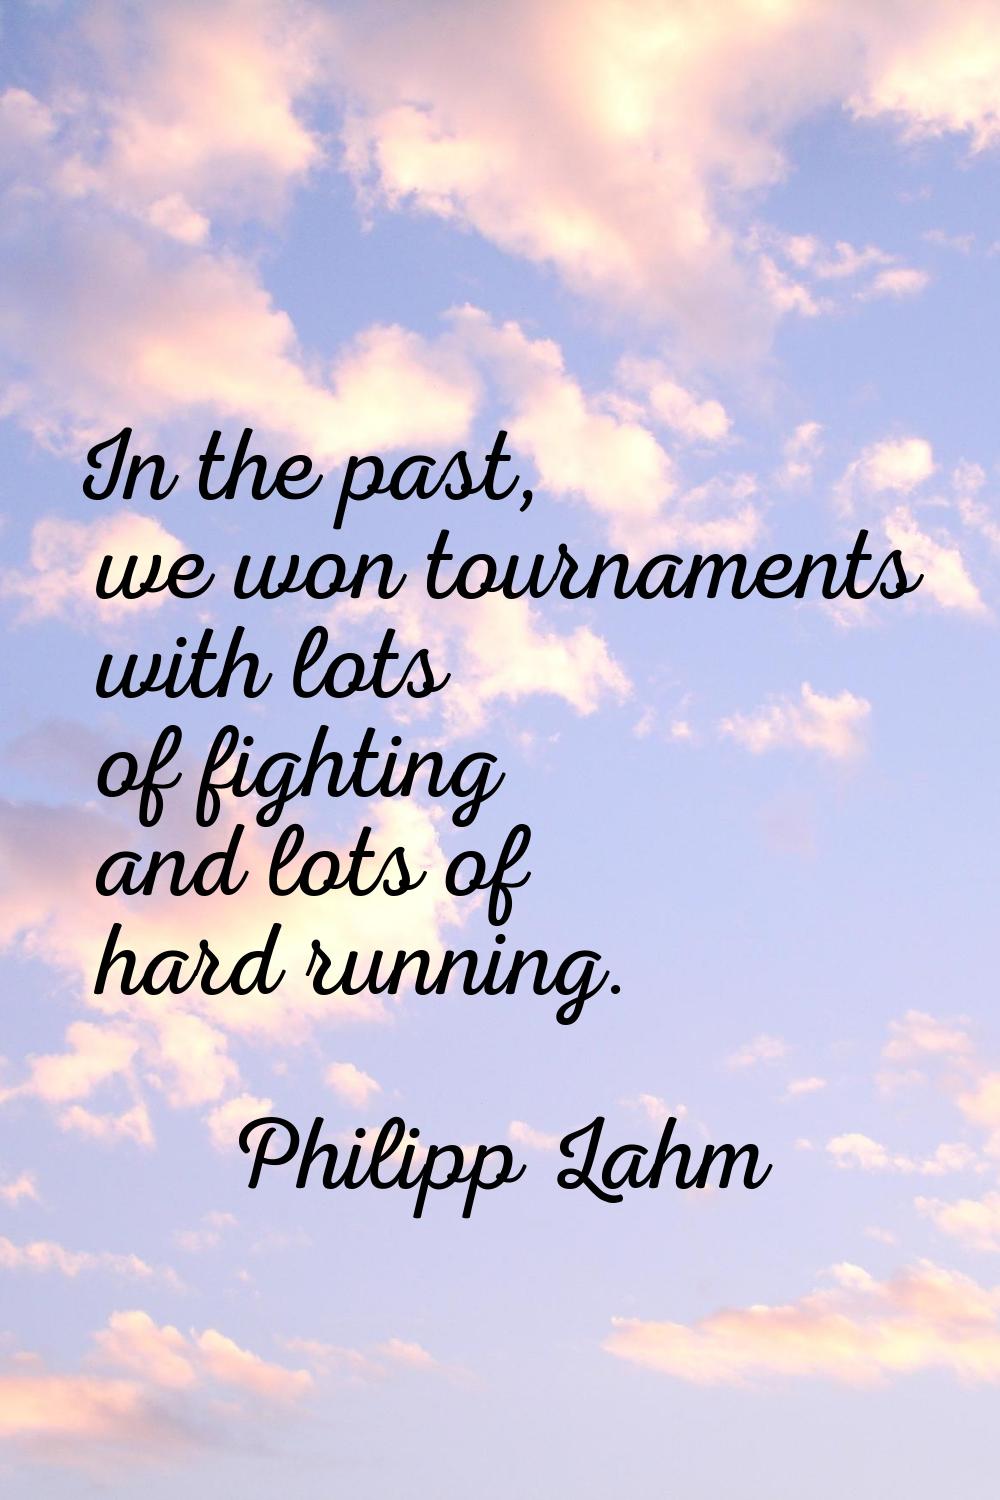 In the past, we won tournaments with lots of fighting and lots of hard running.